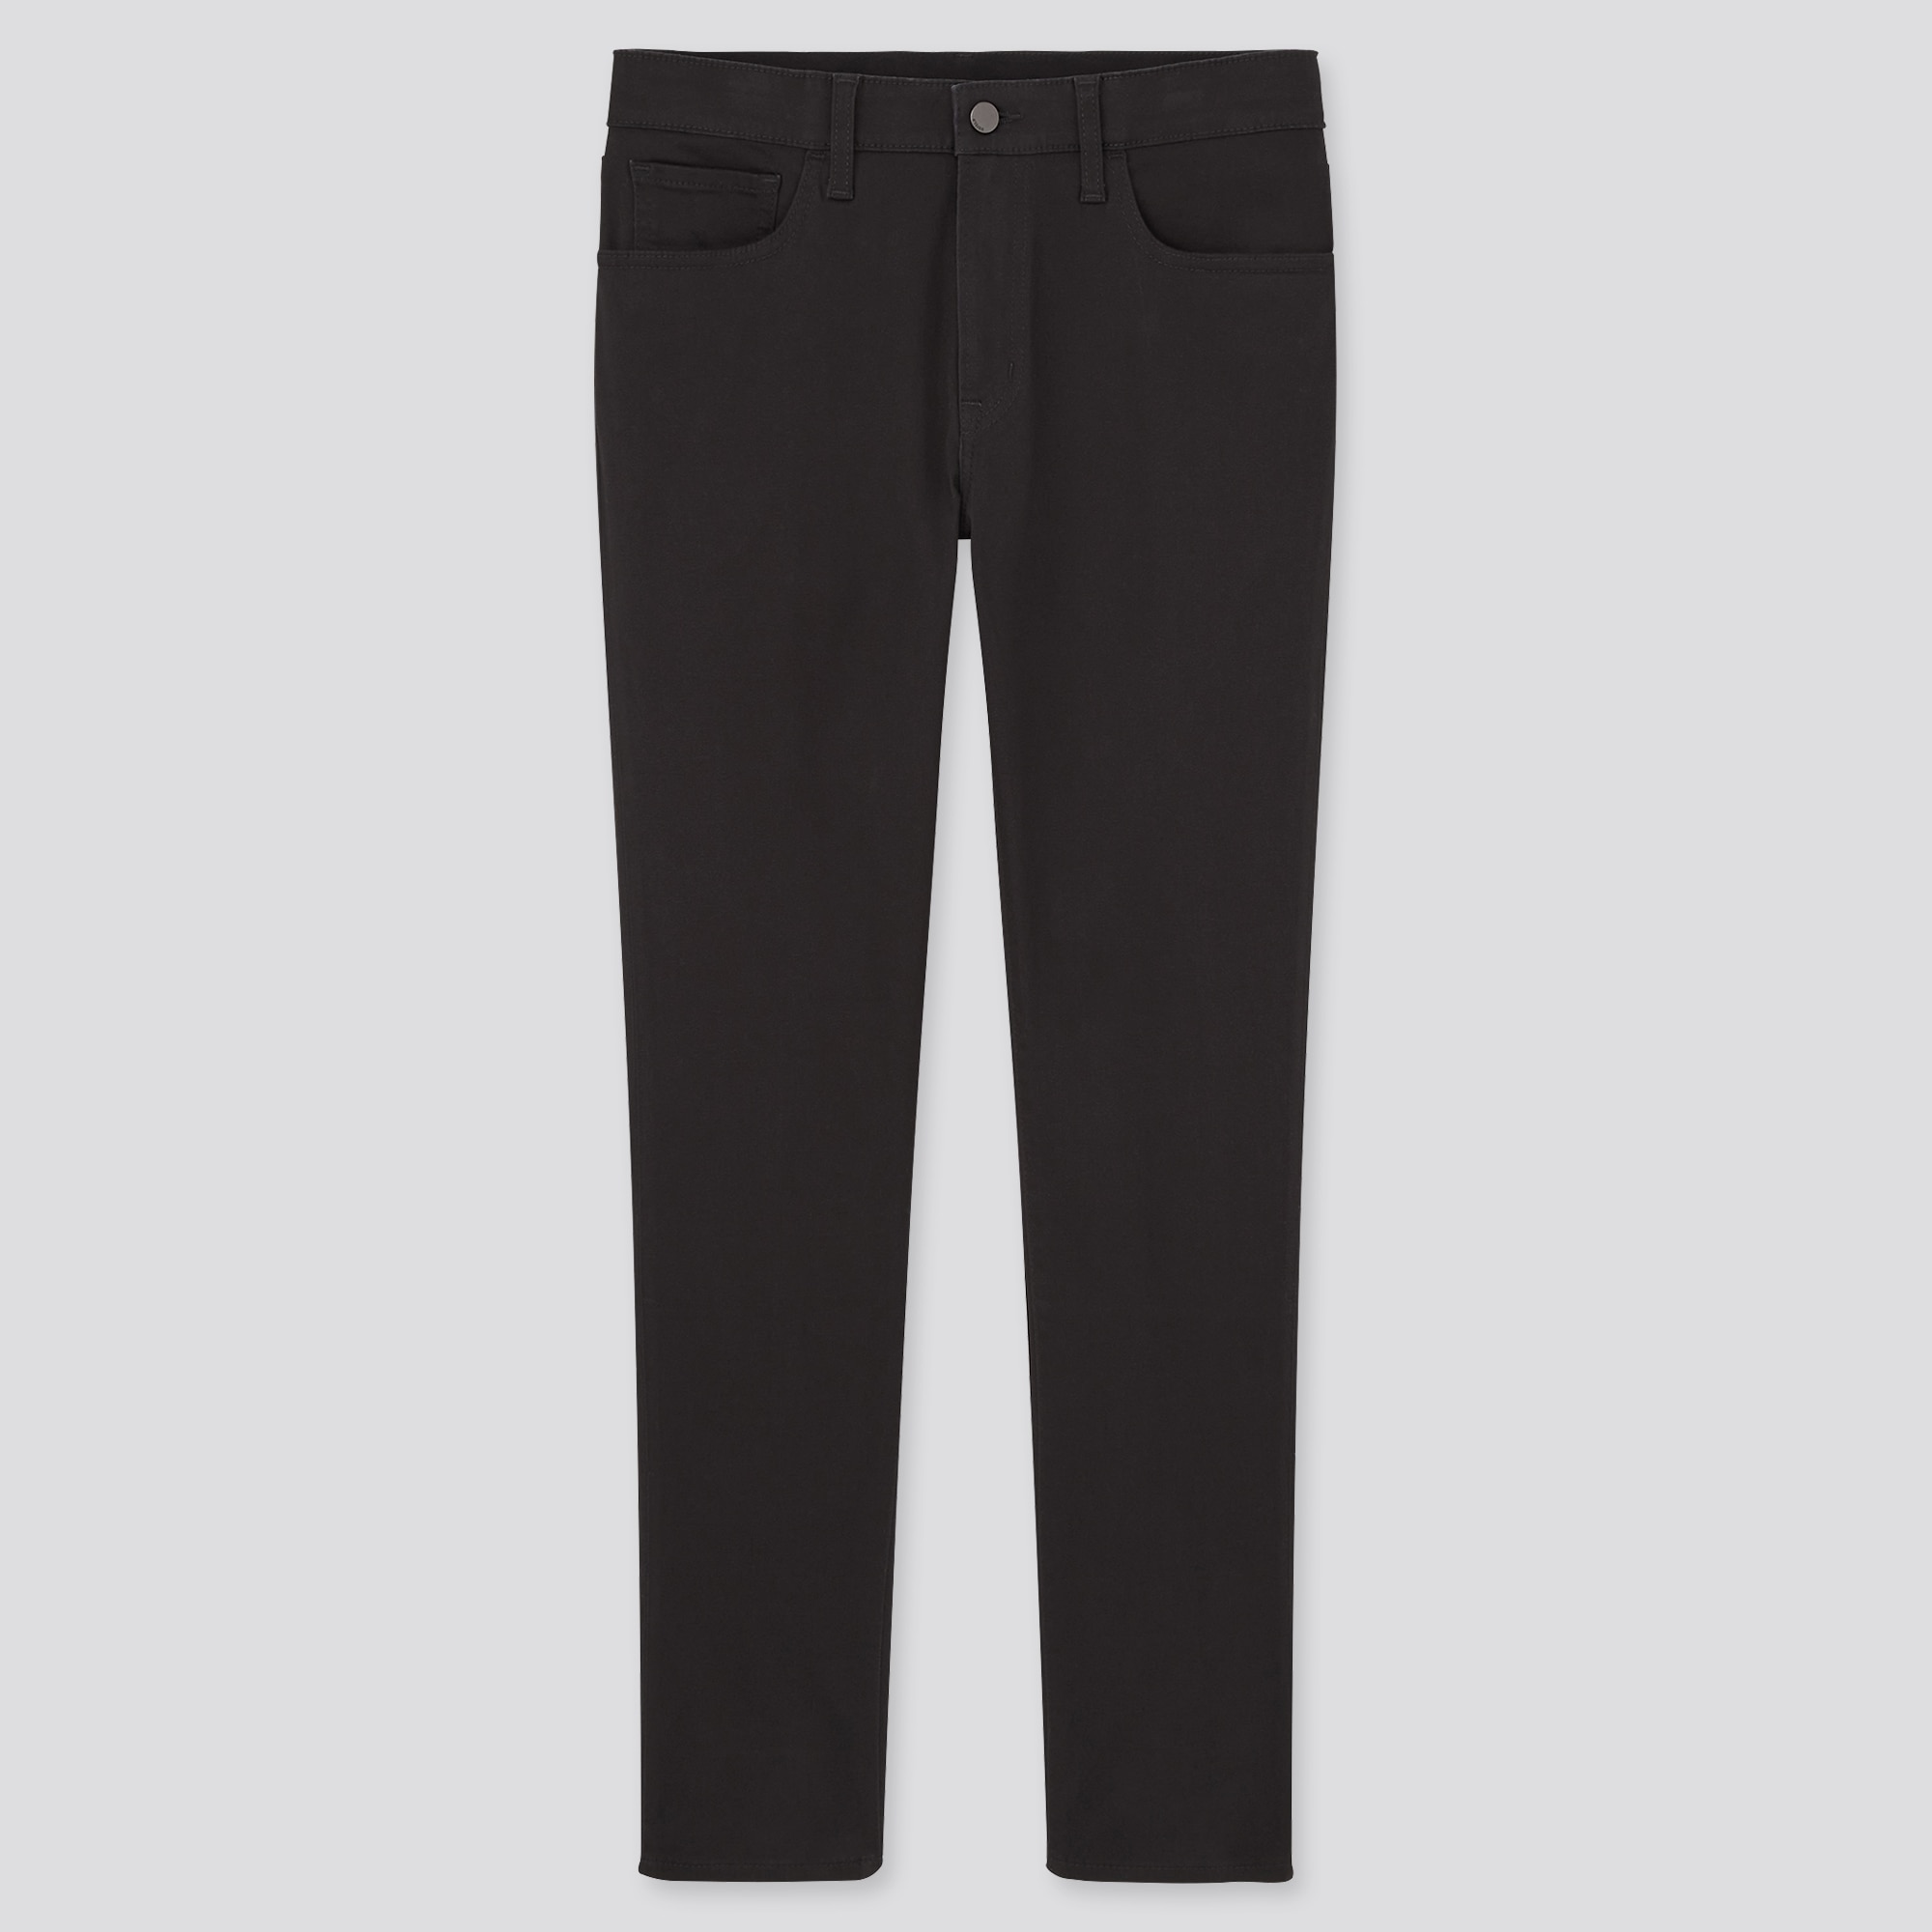 Ultra Stretch Skinny-Fit Color Jeans | UNIQLO US